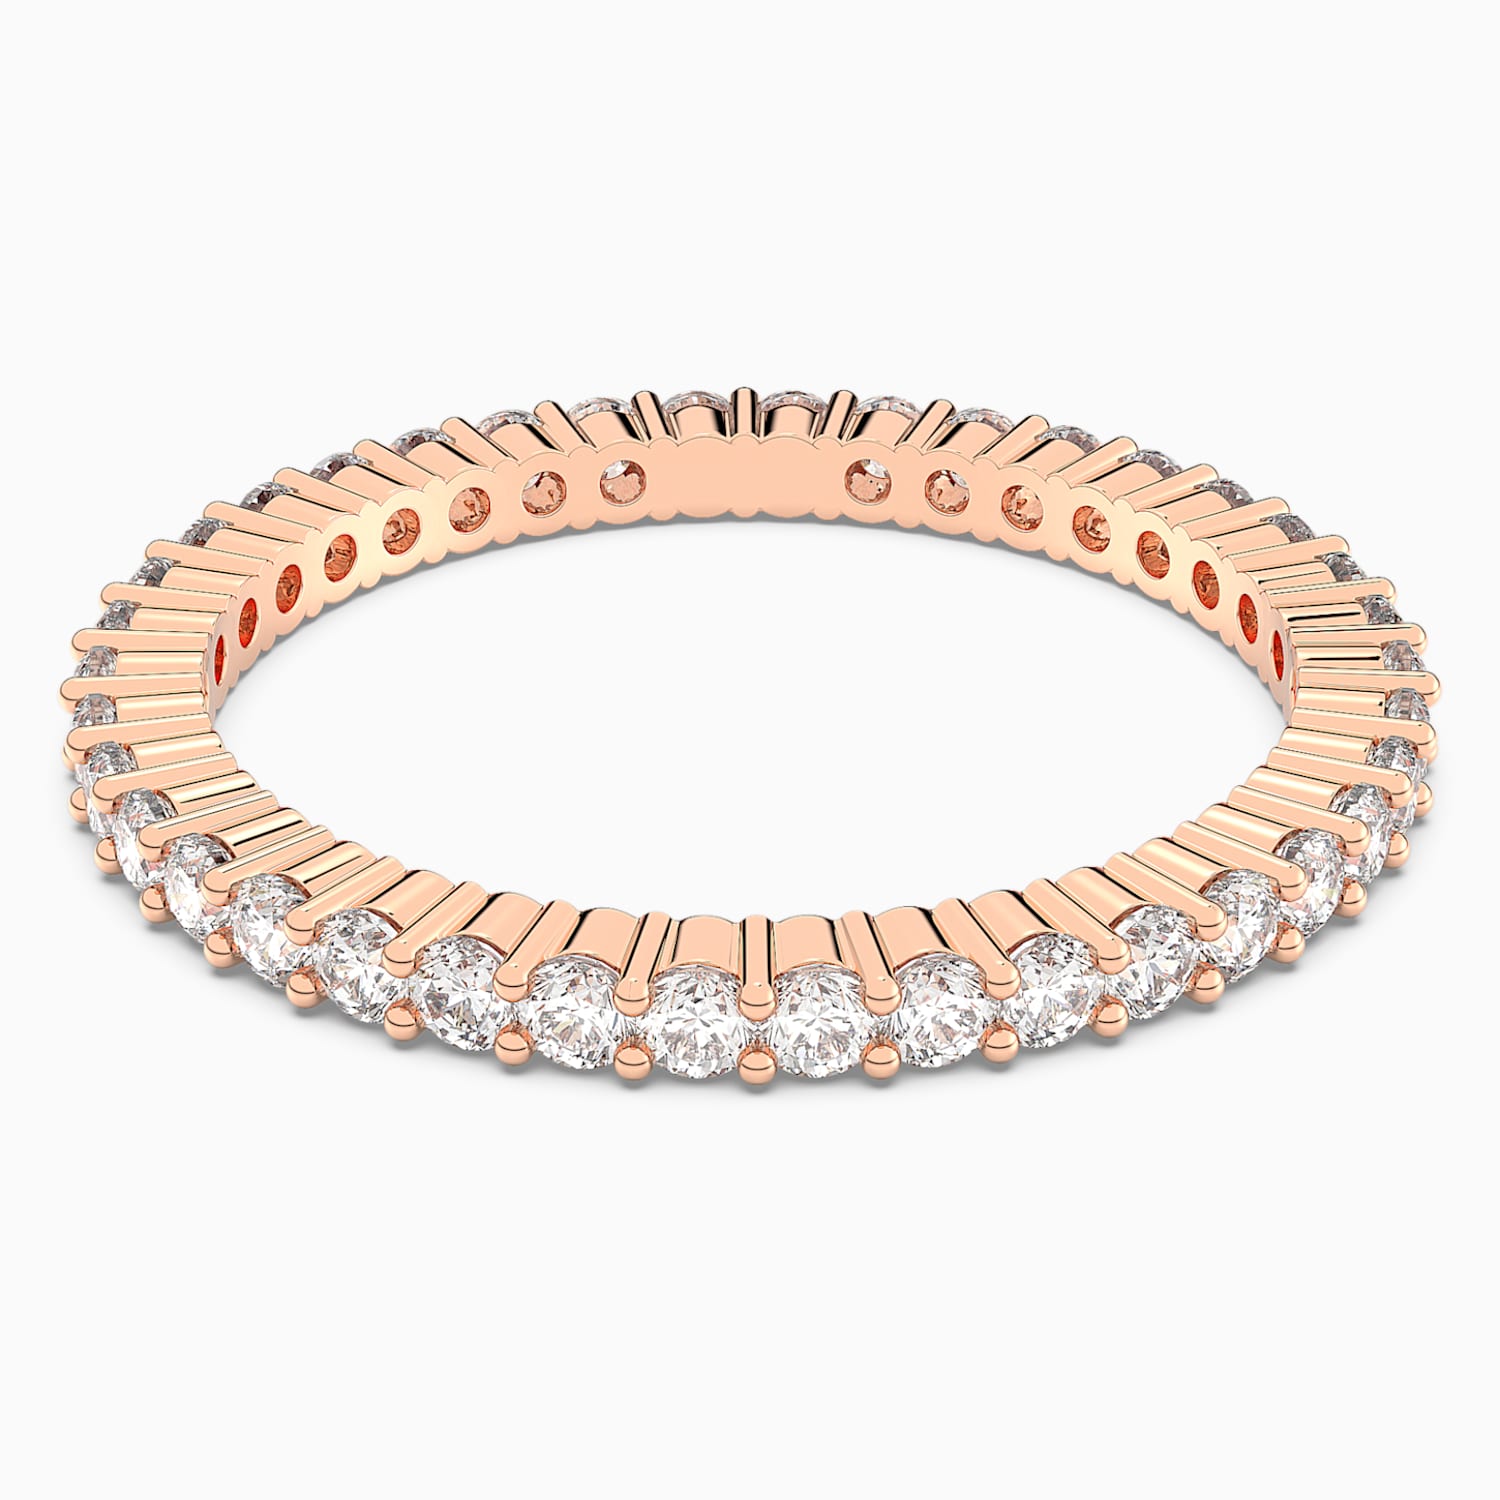 Swarovski Gold Rings Clearance, 58% OFF 